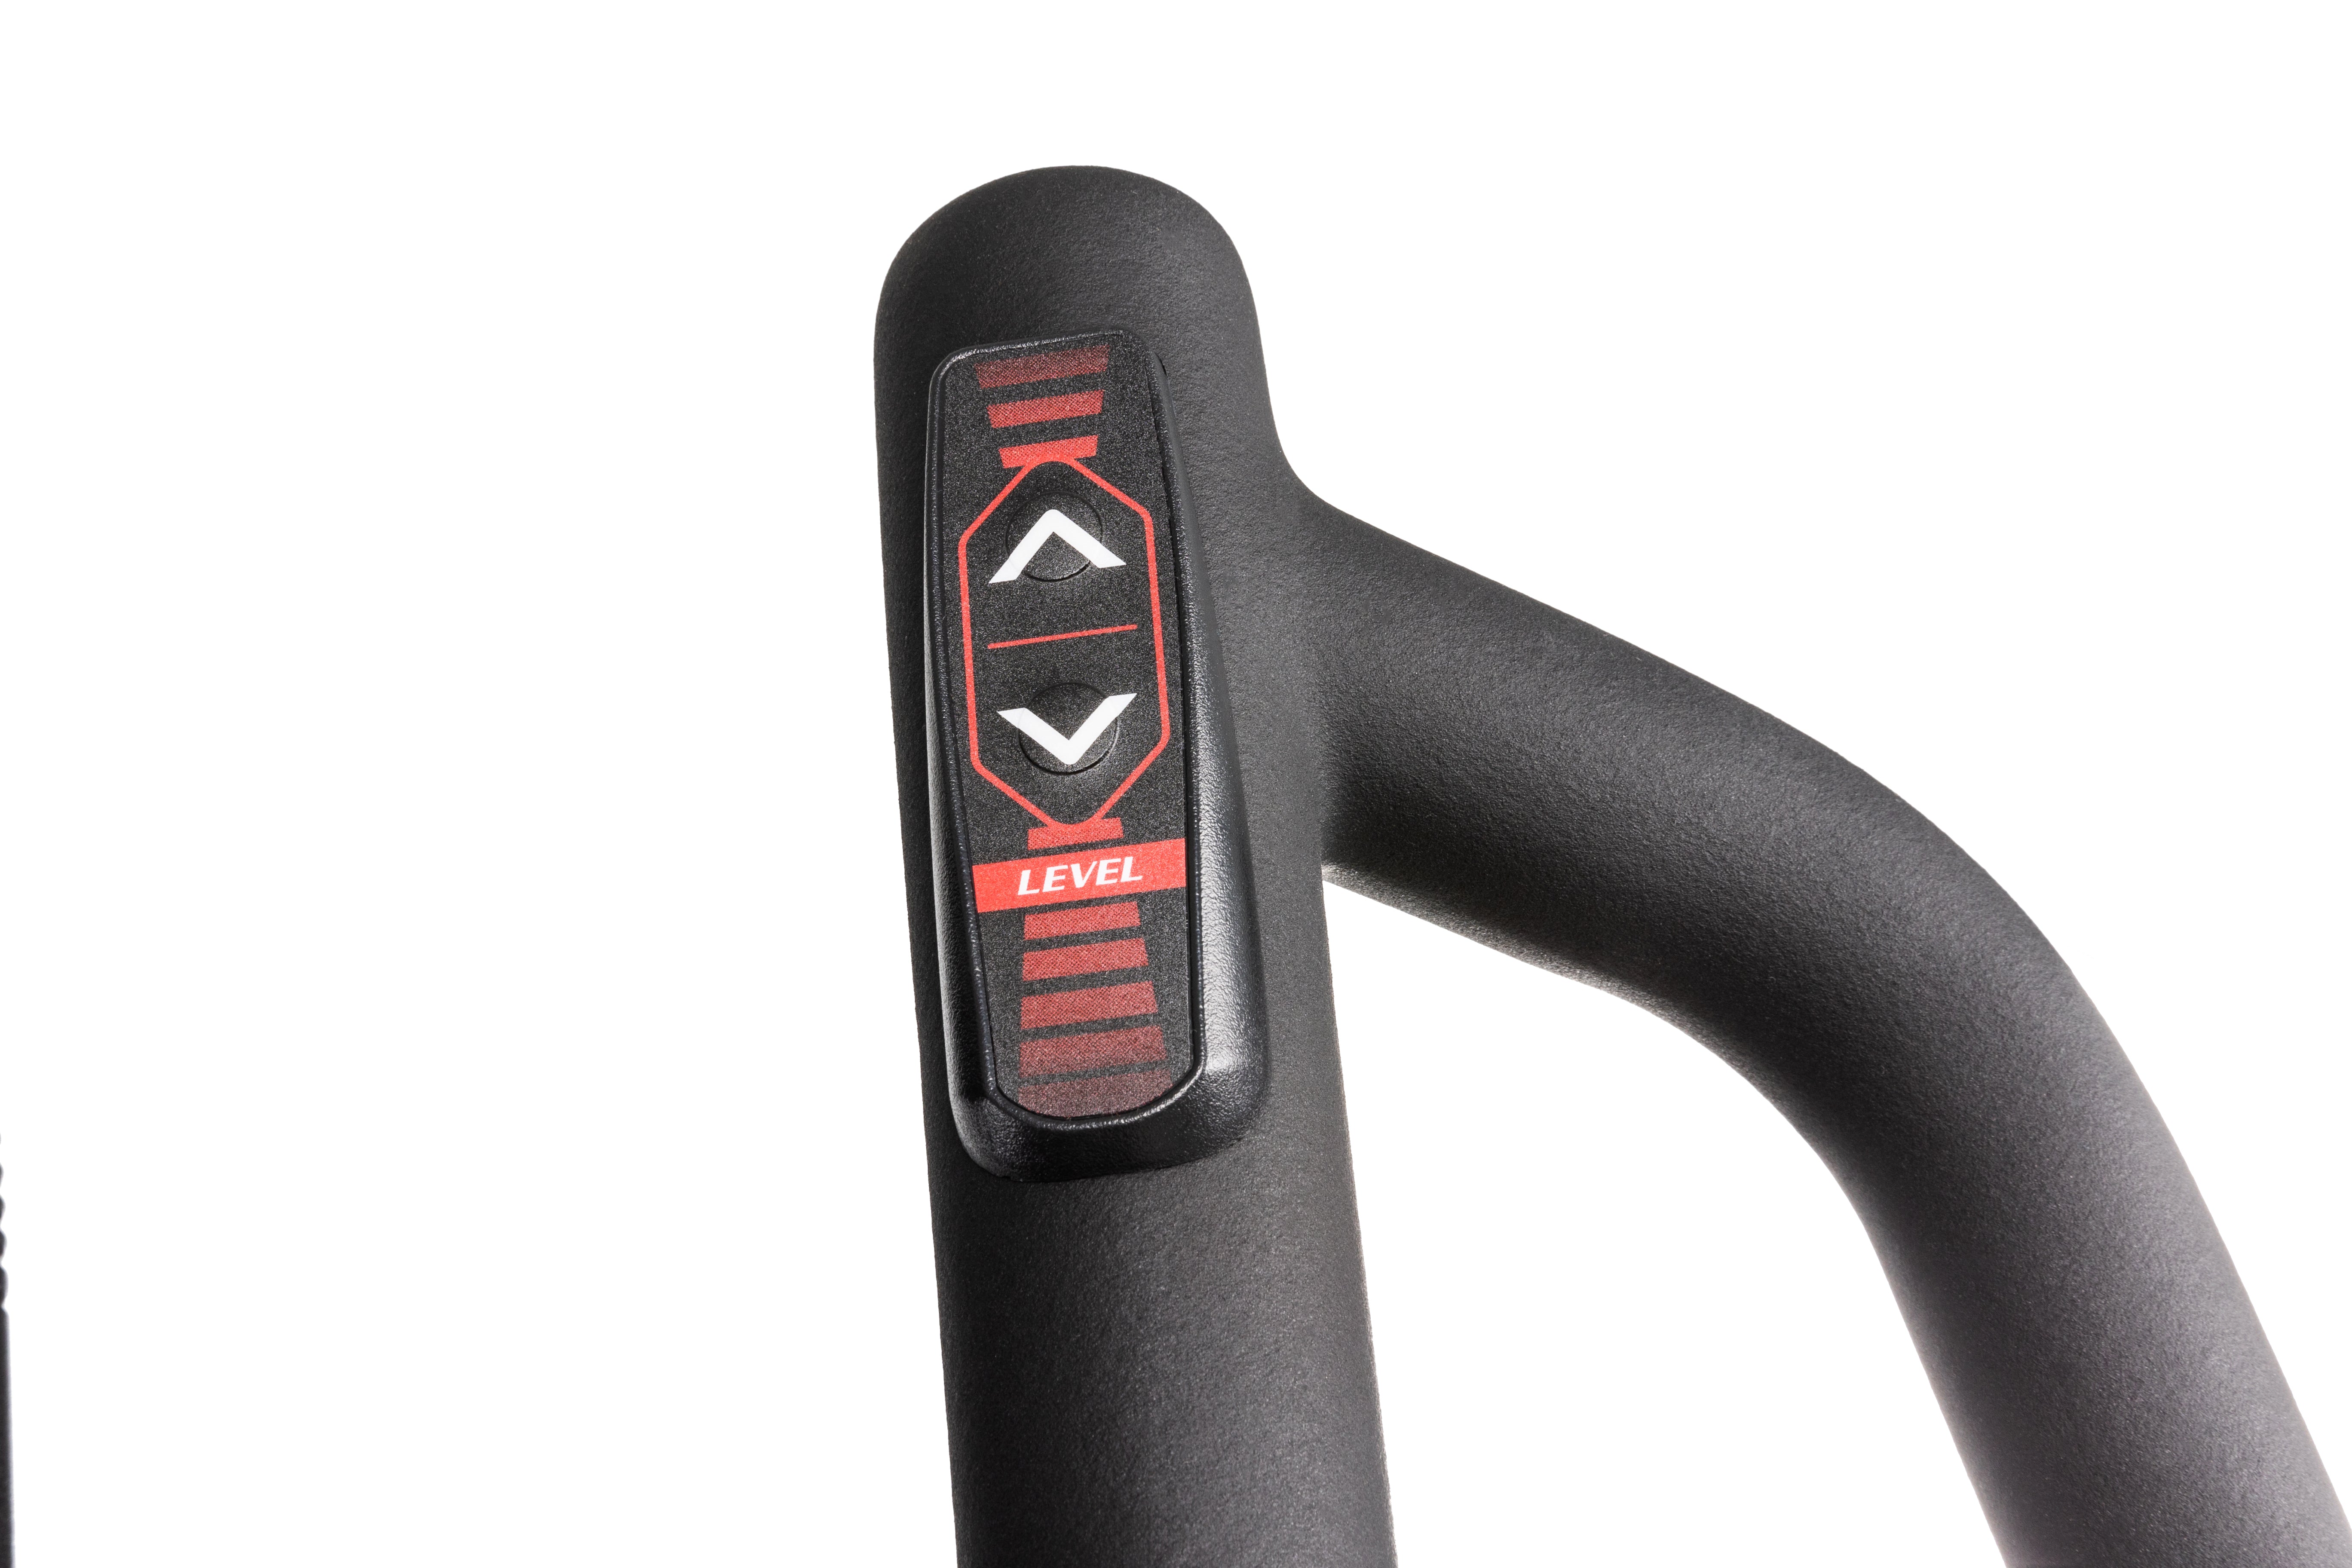 Close-up of the Sole E95S elliptical machine's handle, highlighting the "LEVEL" adjustment button with up and down arrows on a matte black grip.